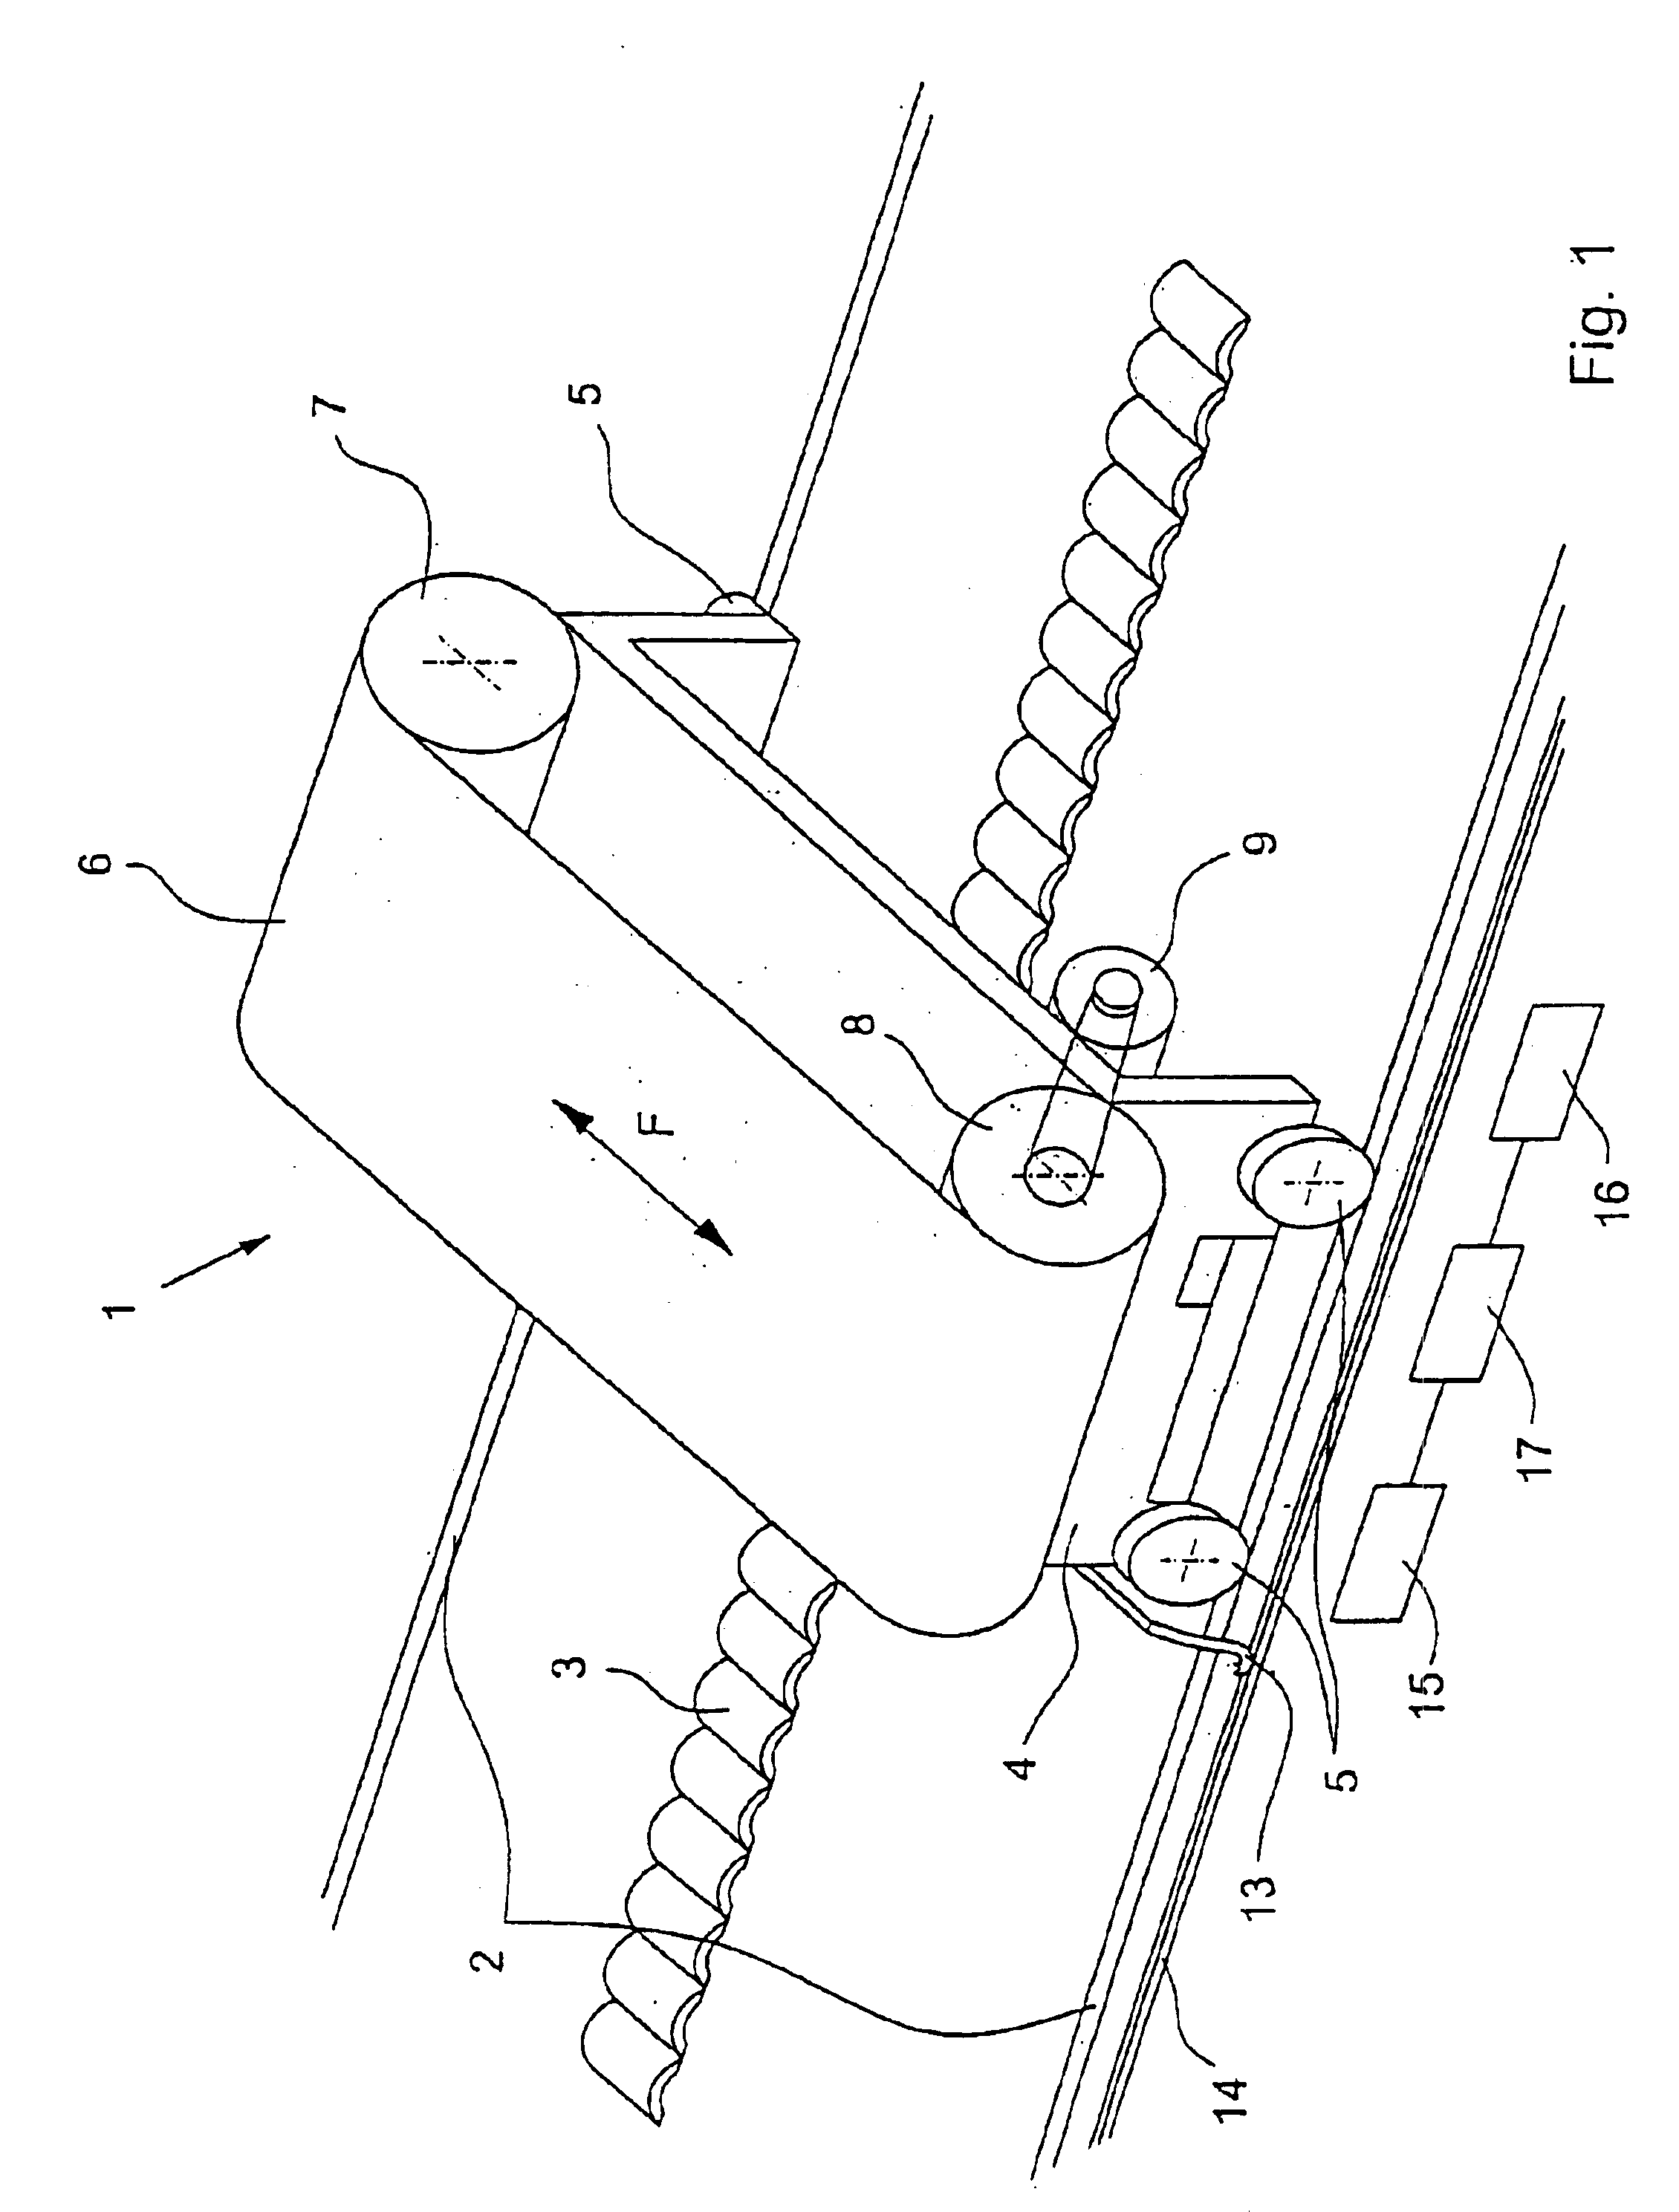 Sorting system for transferring items from a trolley to an unloading station in response to the detection of a magnetic field generated at the unloading station